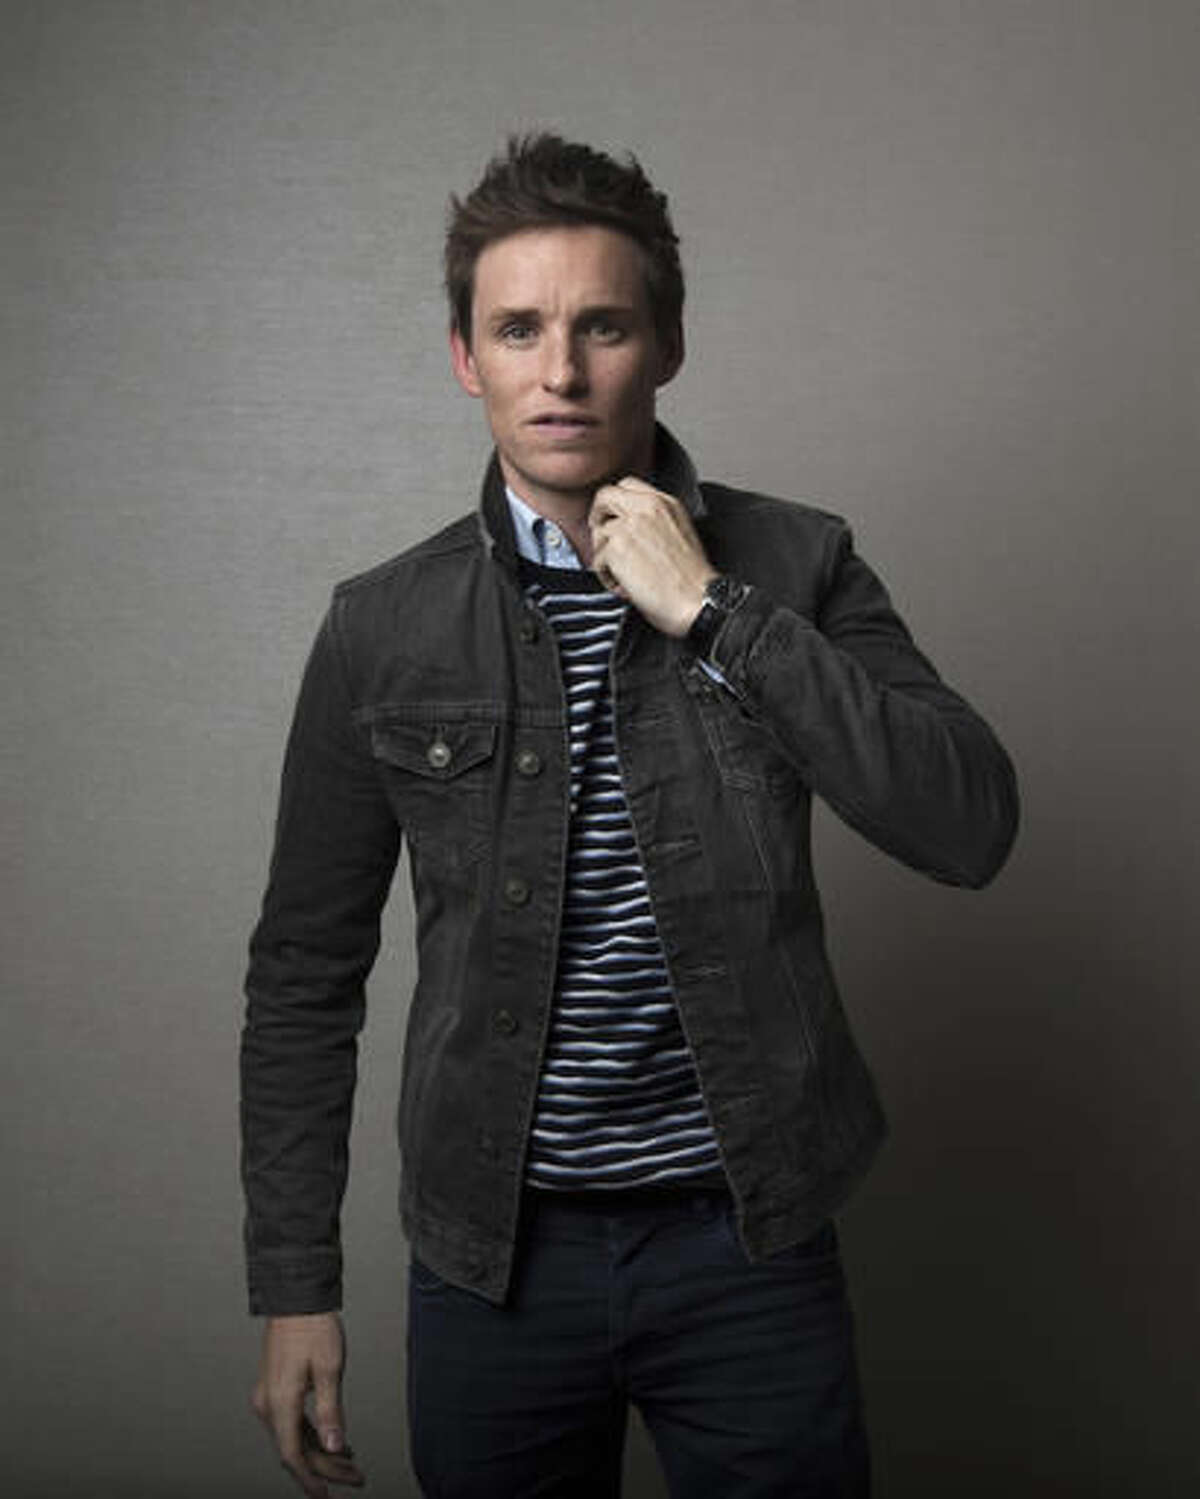 In this Nov. 7, 2016 photo, actor Eddie Redmayne poses for a portrait in New York to promote his film, "Fantastic Beasts," the first of a planned five prequels to the "Harry Potter" series by J.K. Rowling. (Photo by Taylor Jewell/Invision/AP)